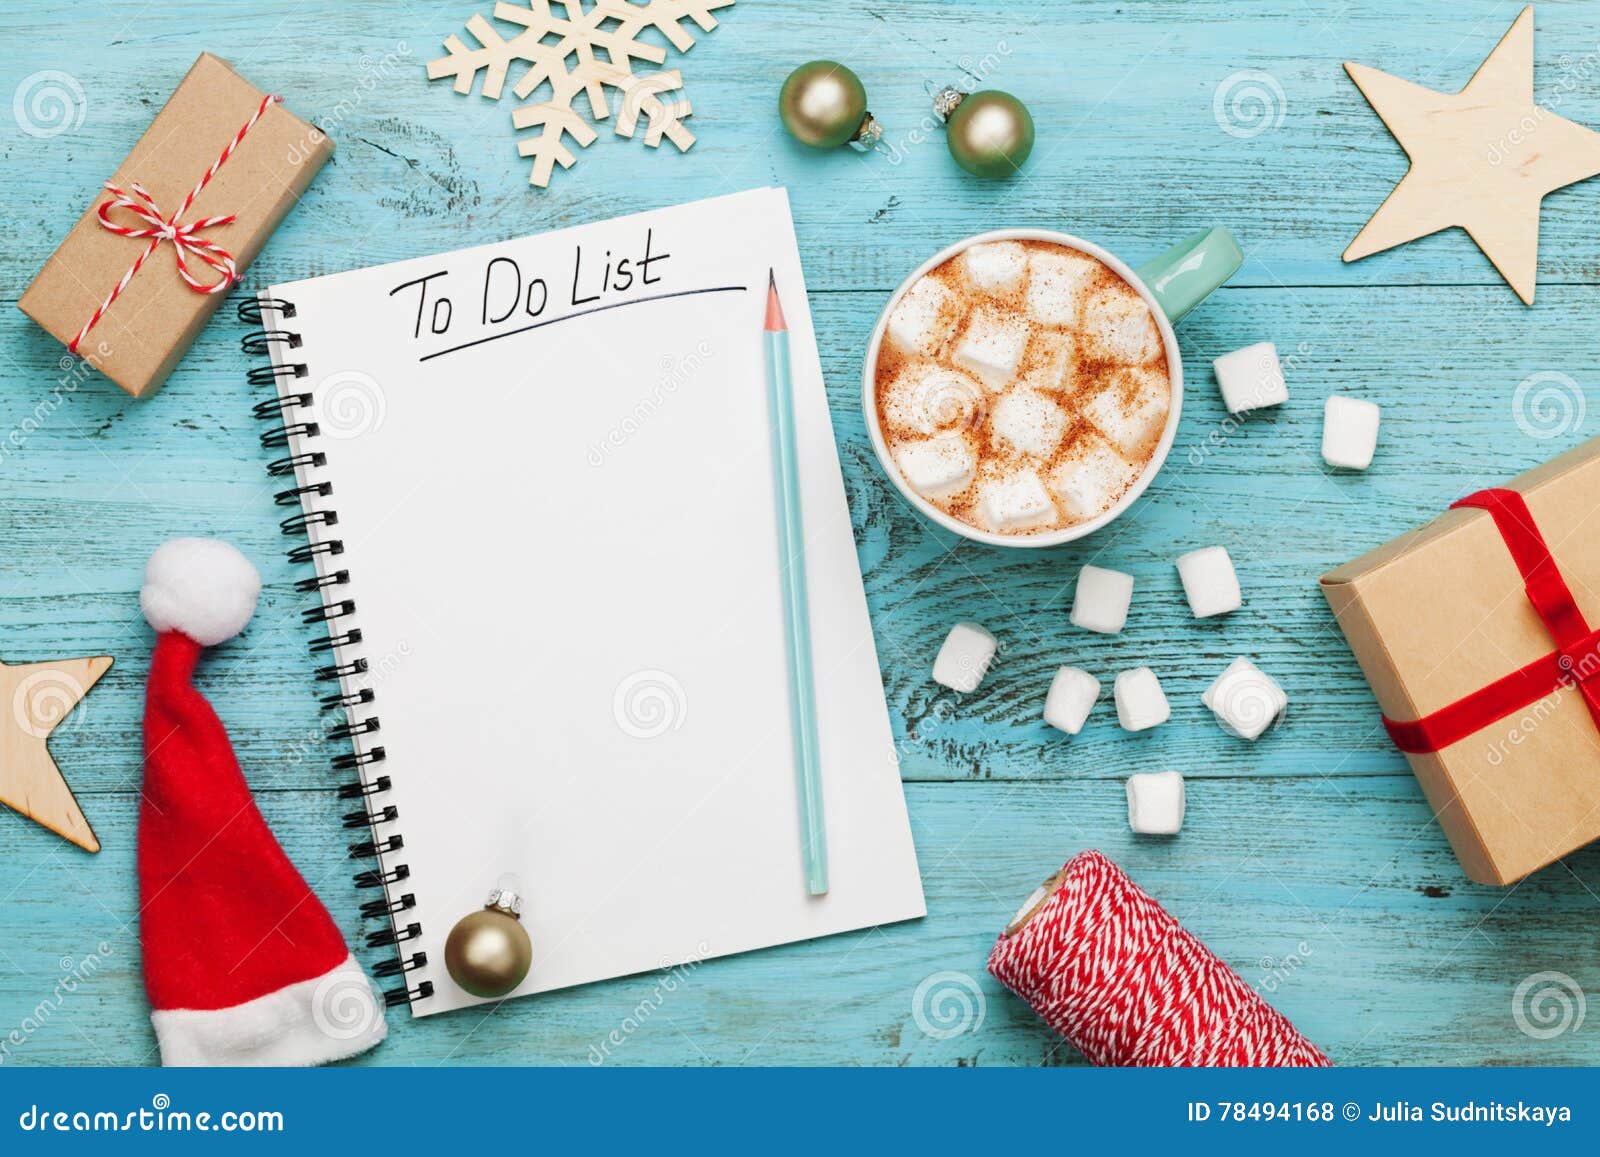 cup of hot cocoa or chocolate with marshmallow, holiday decorations and notebook with to do list, christmas planning. flat lay.